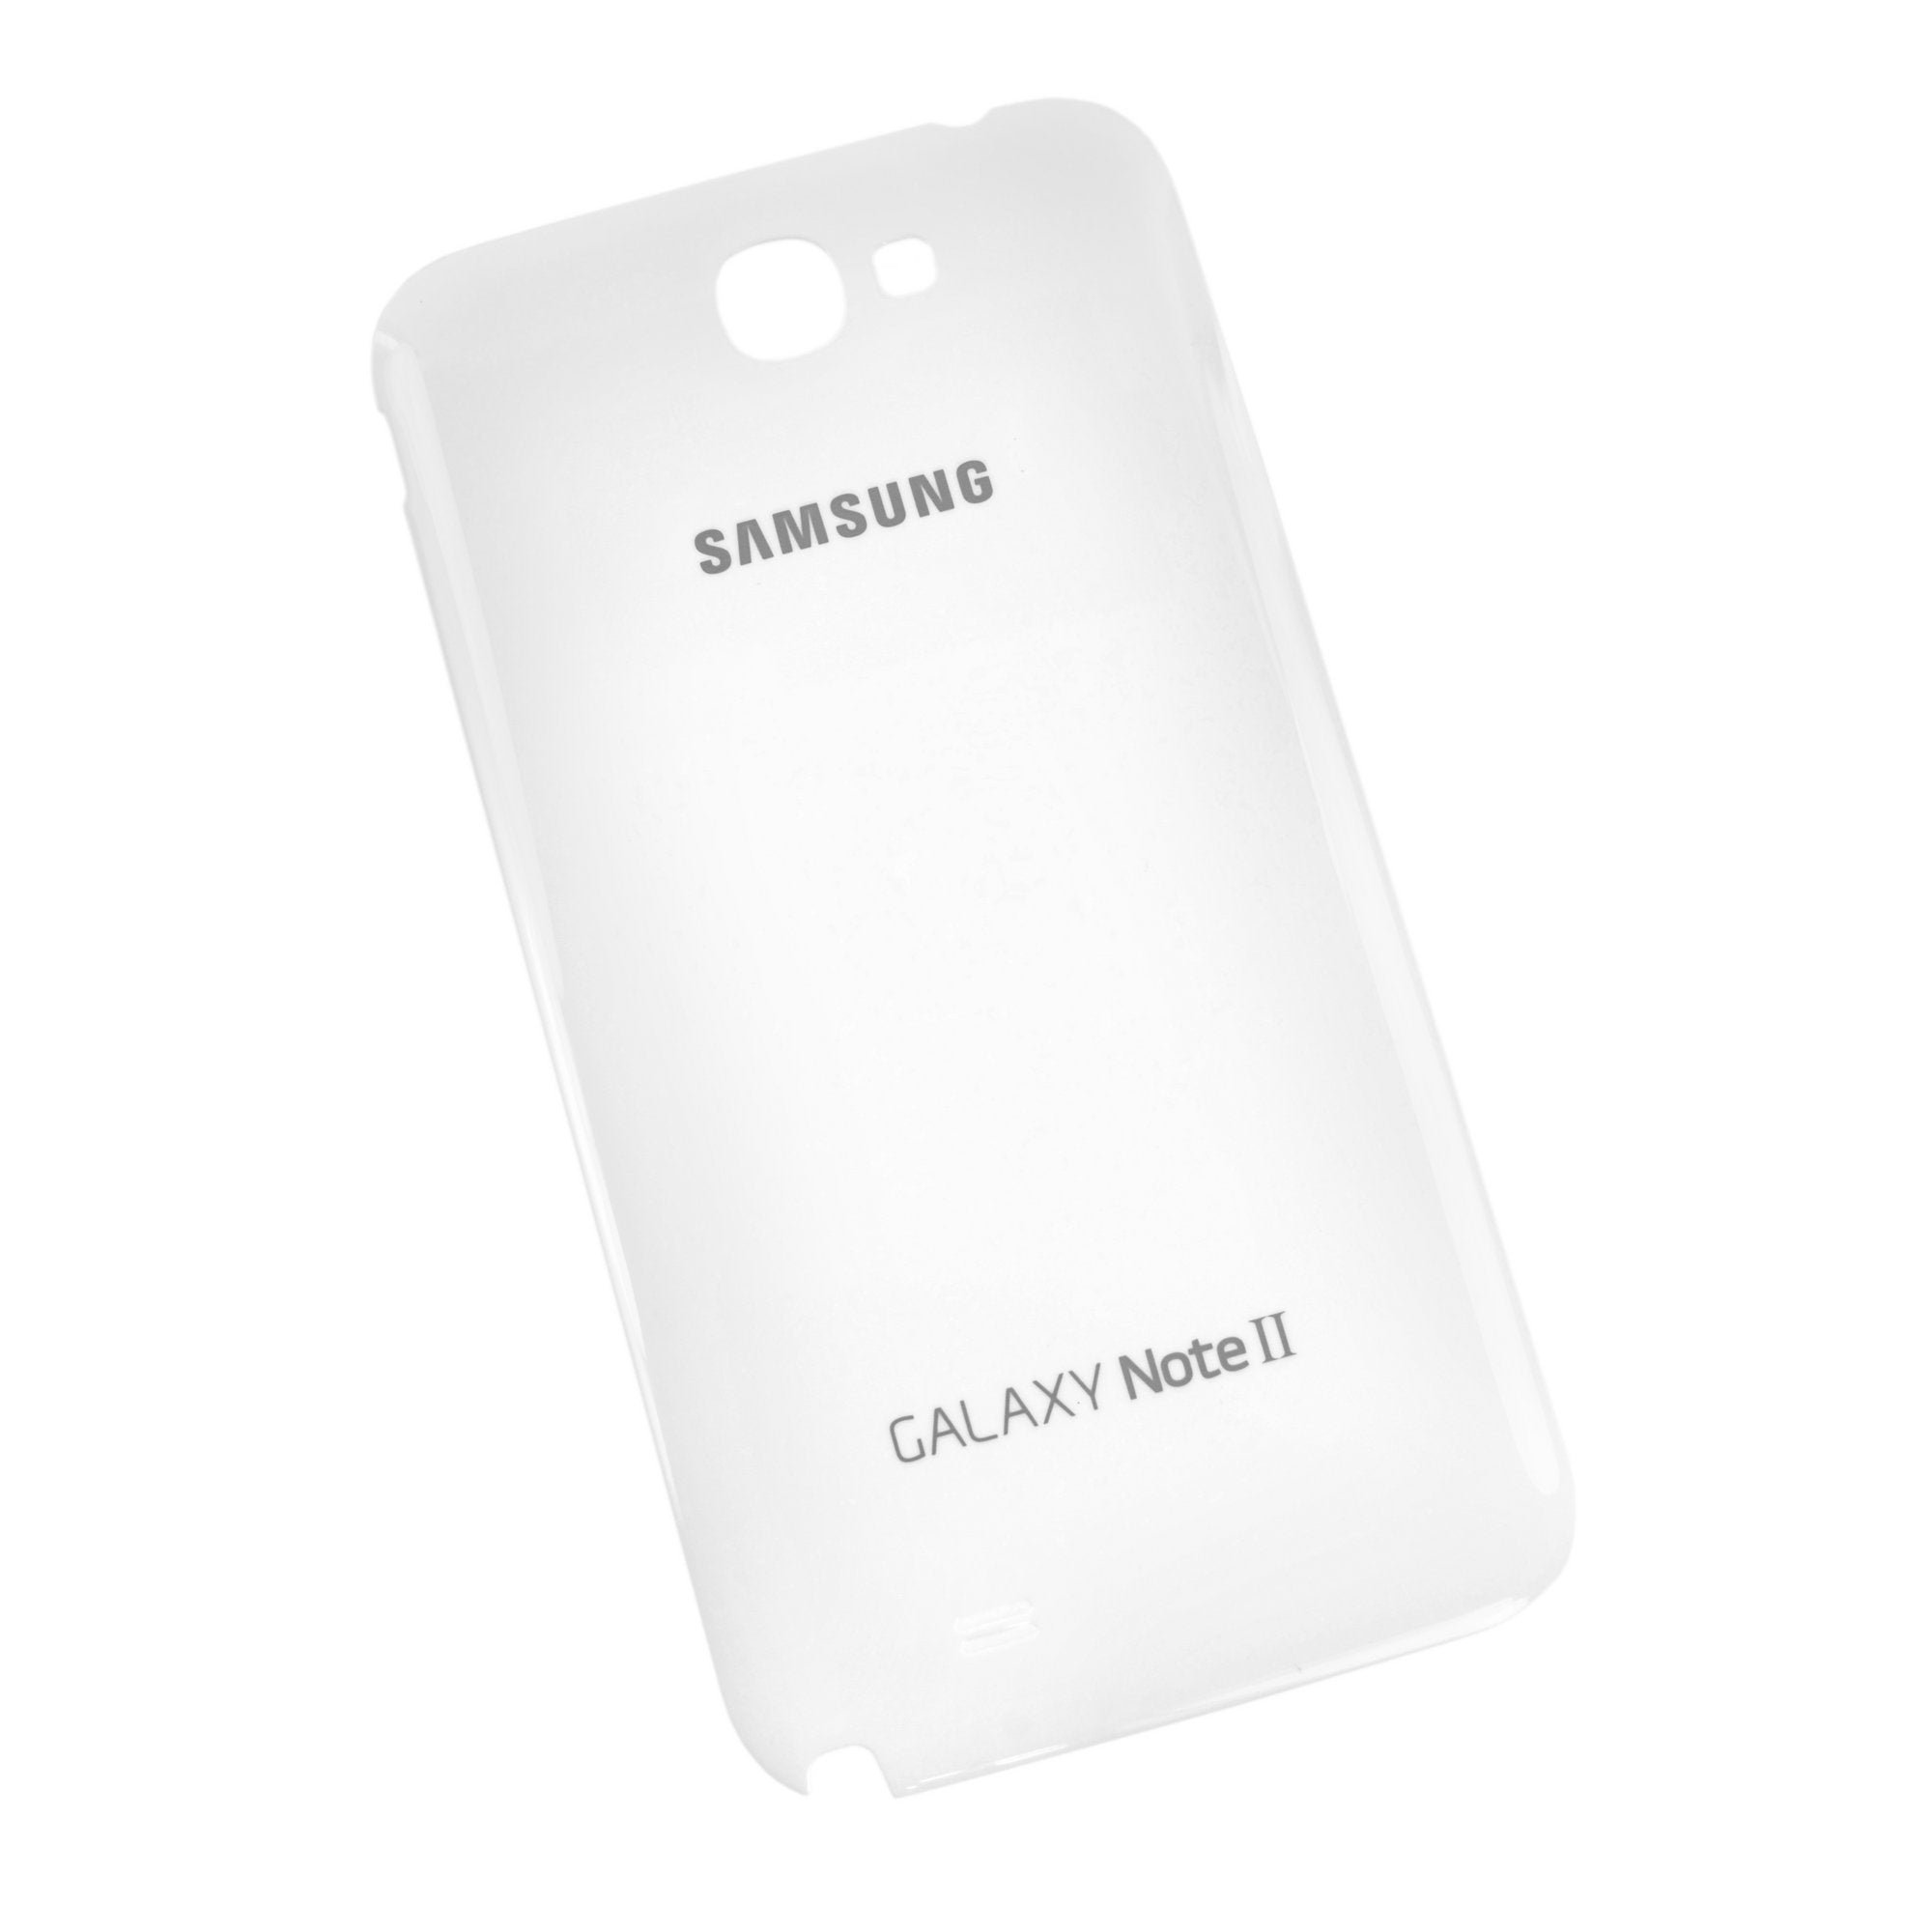 Galaxy Note II Battery Cover (AT&T) White New GH98-25388A